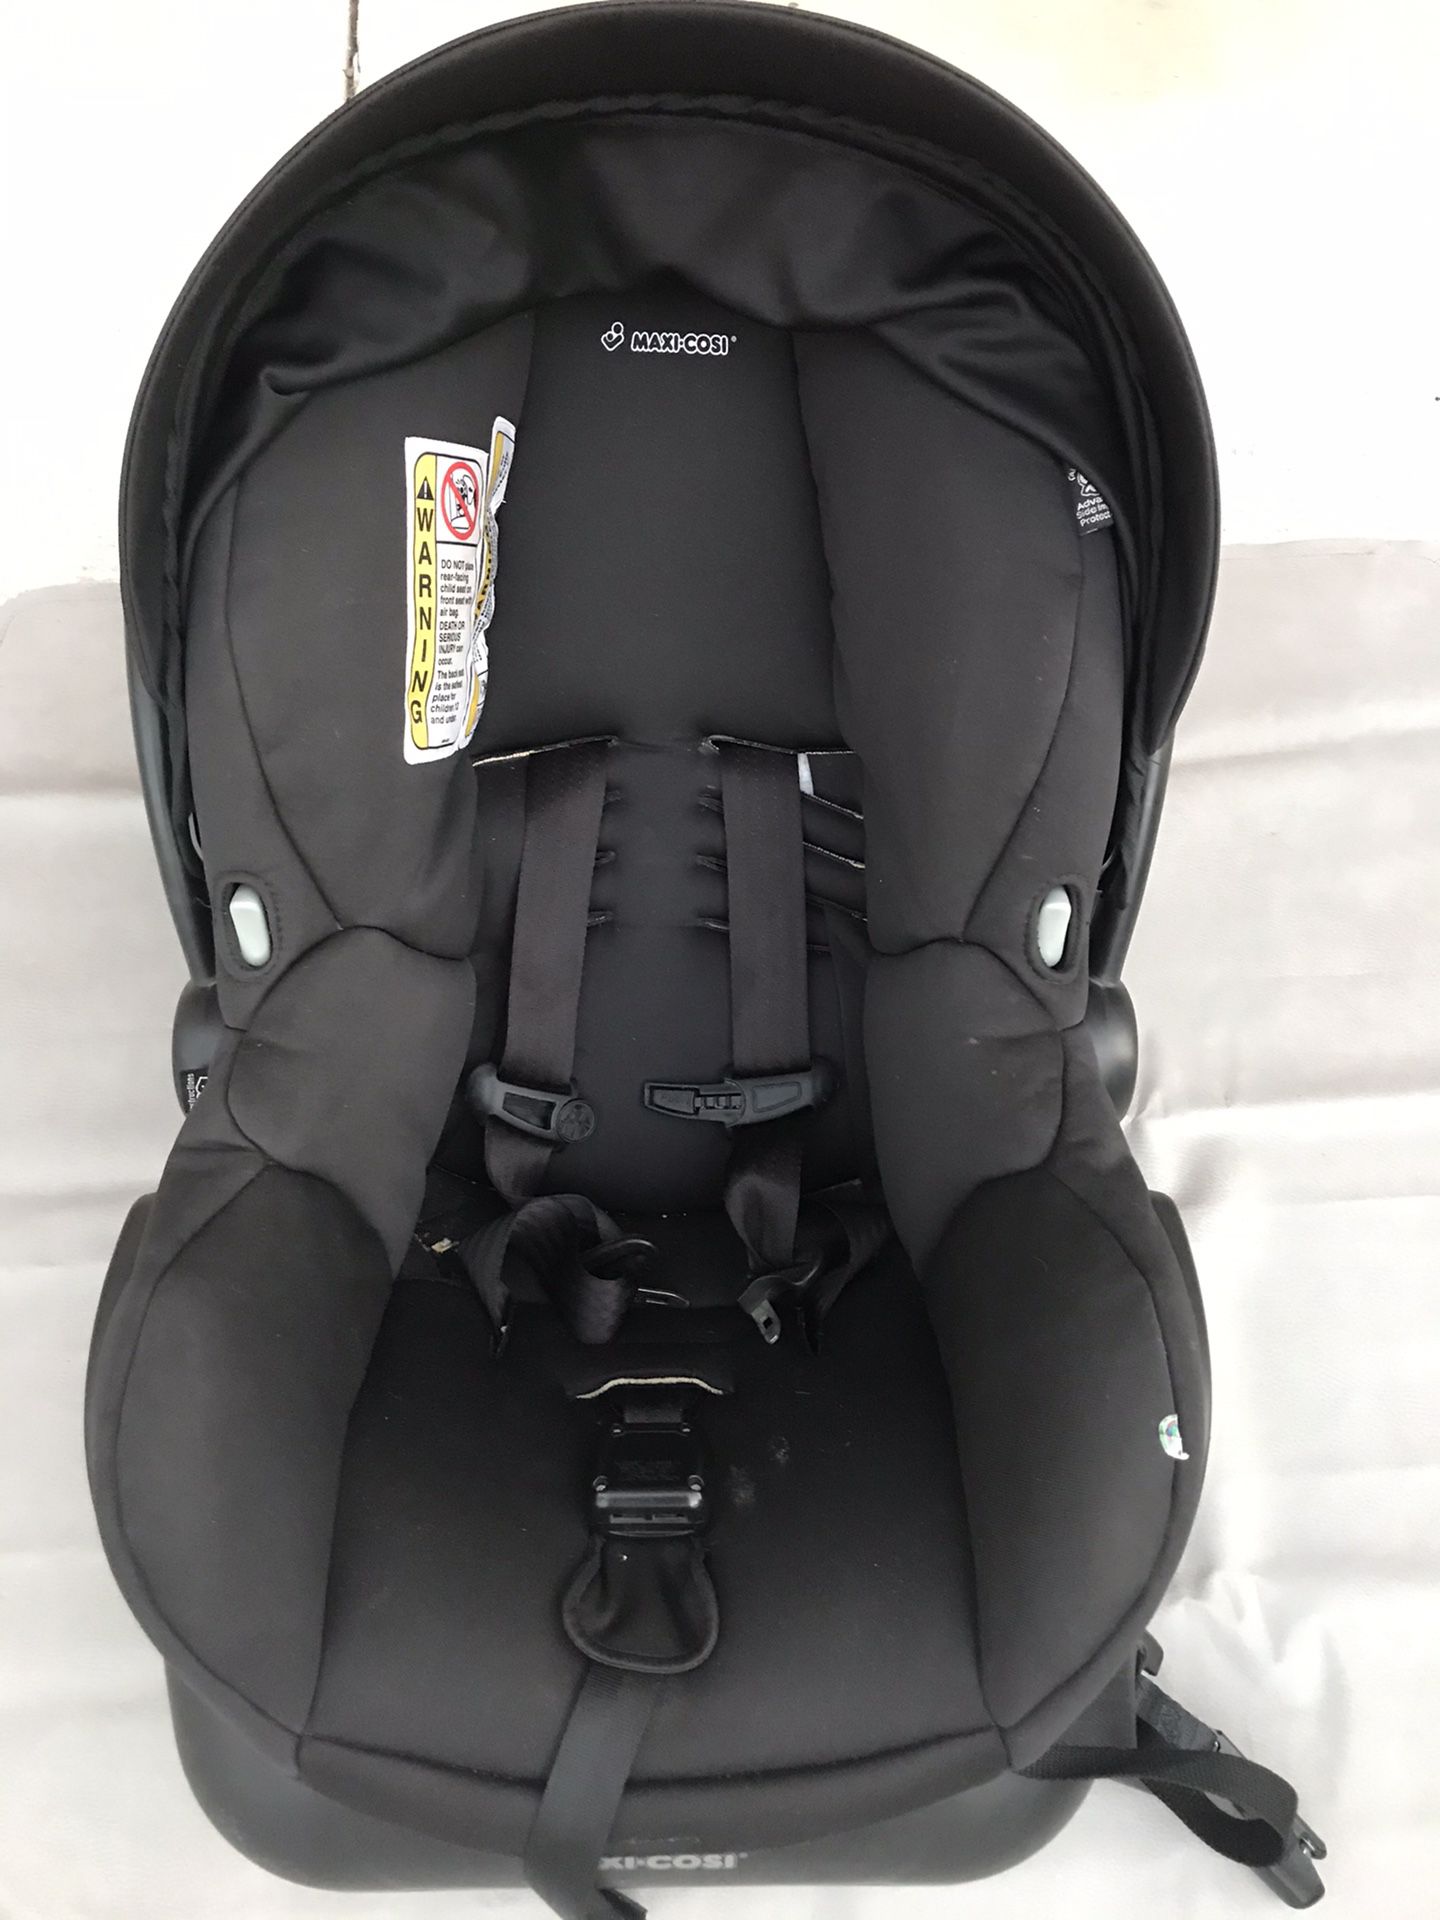 Maxi Cosi infant car seat with base